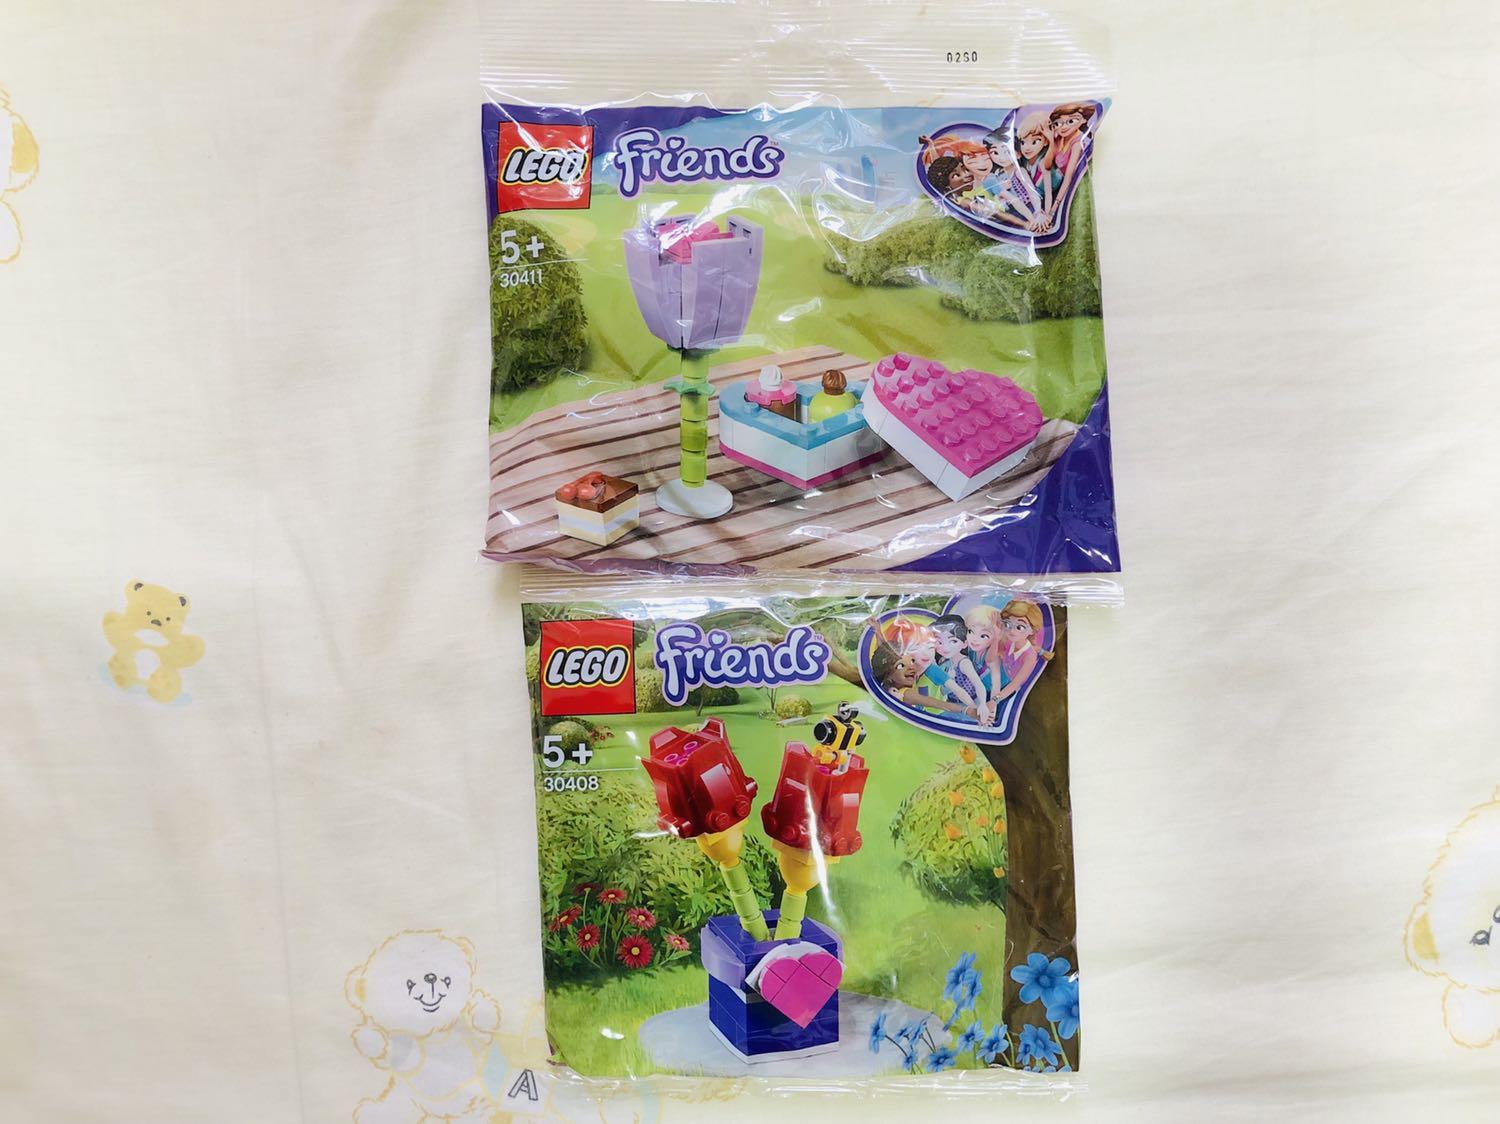 No bag LEGO Friends 30408 Tulips Polybag 100% Complete W/ Manual 